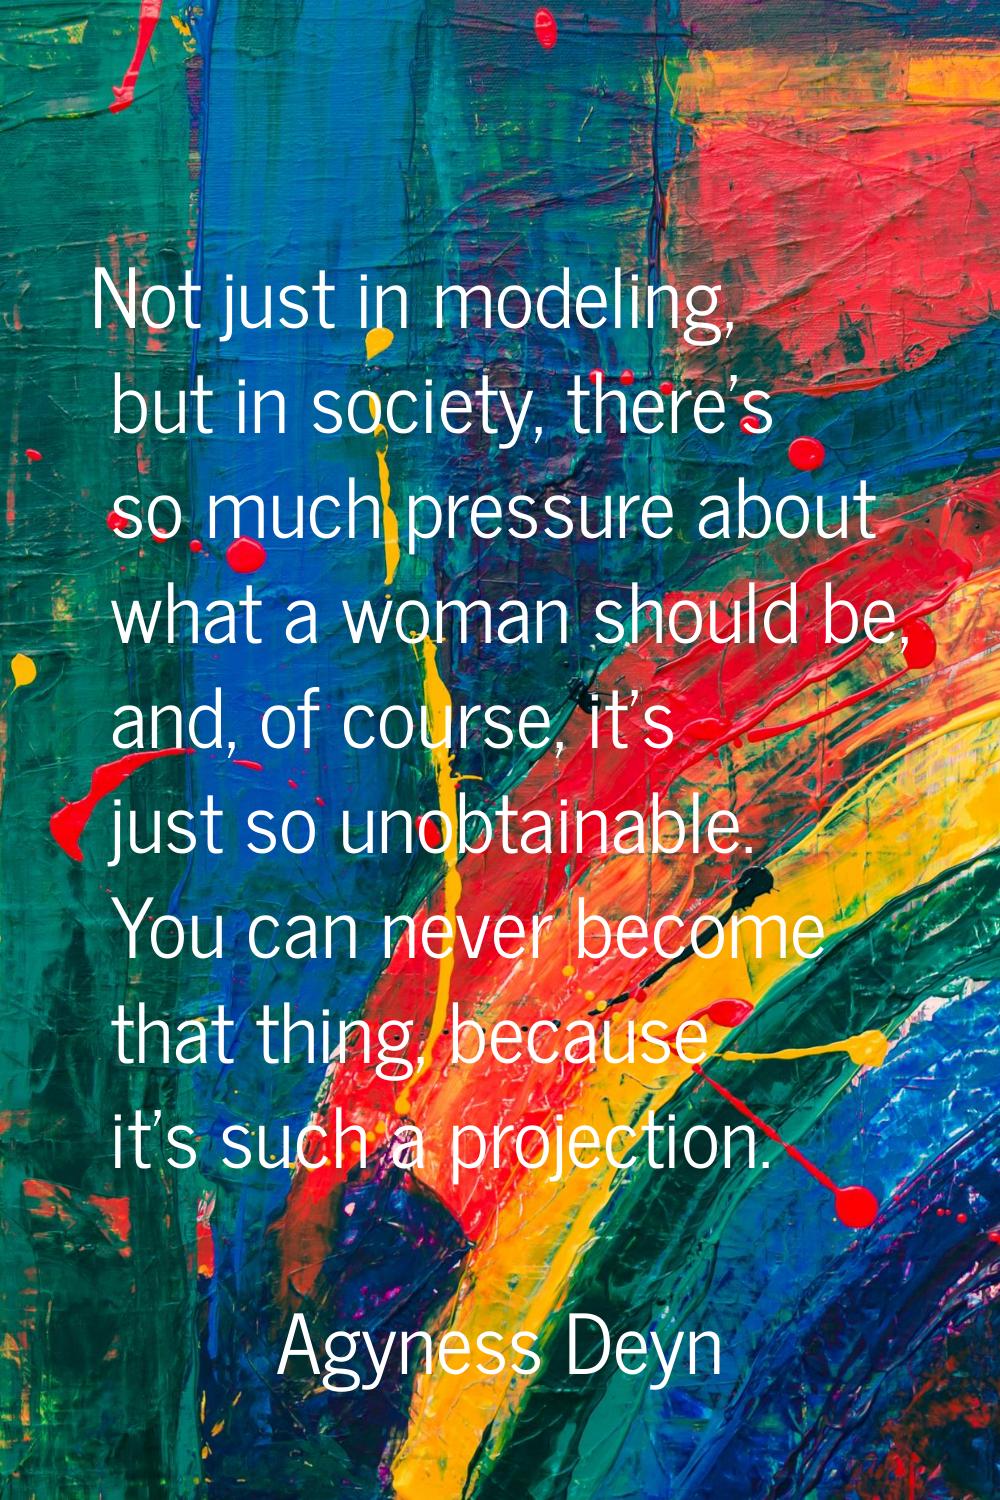 Not just in modeling, but in society, there's so much pressure about what a woman should be, and, o